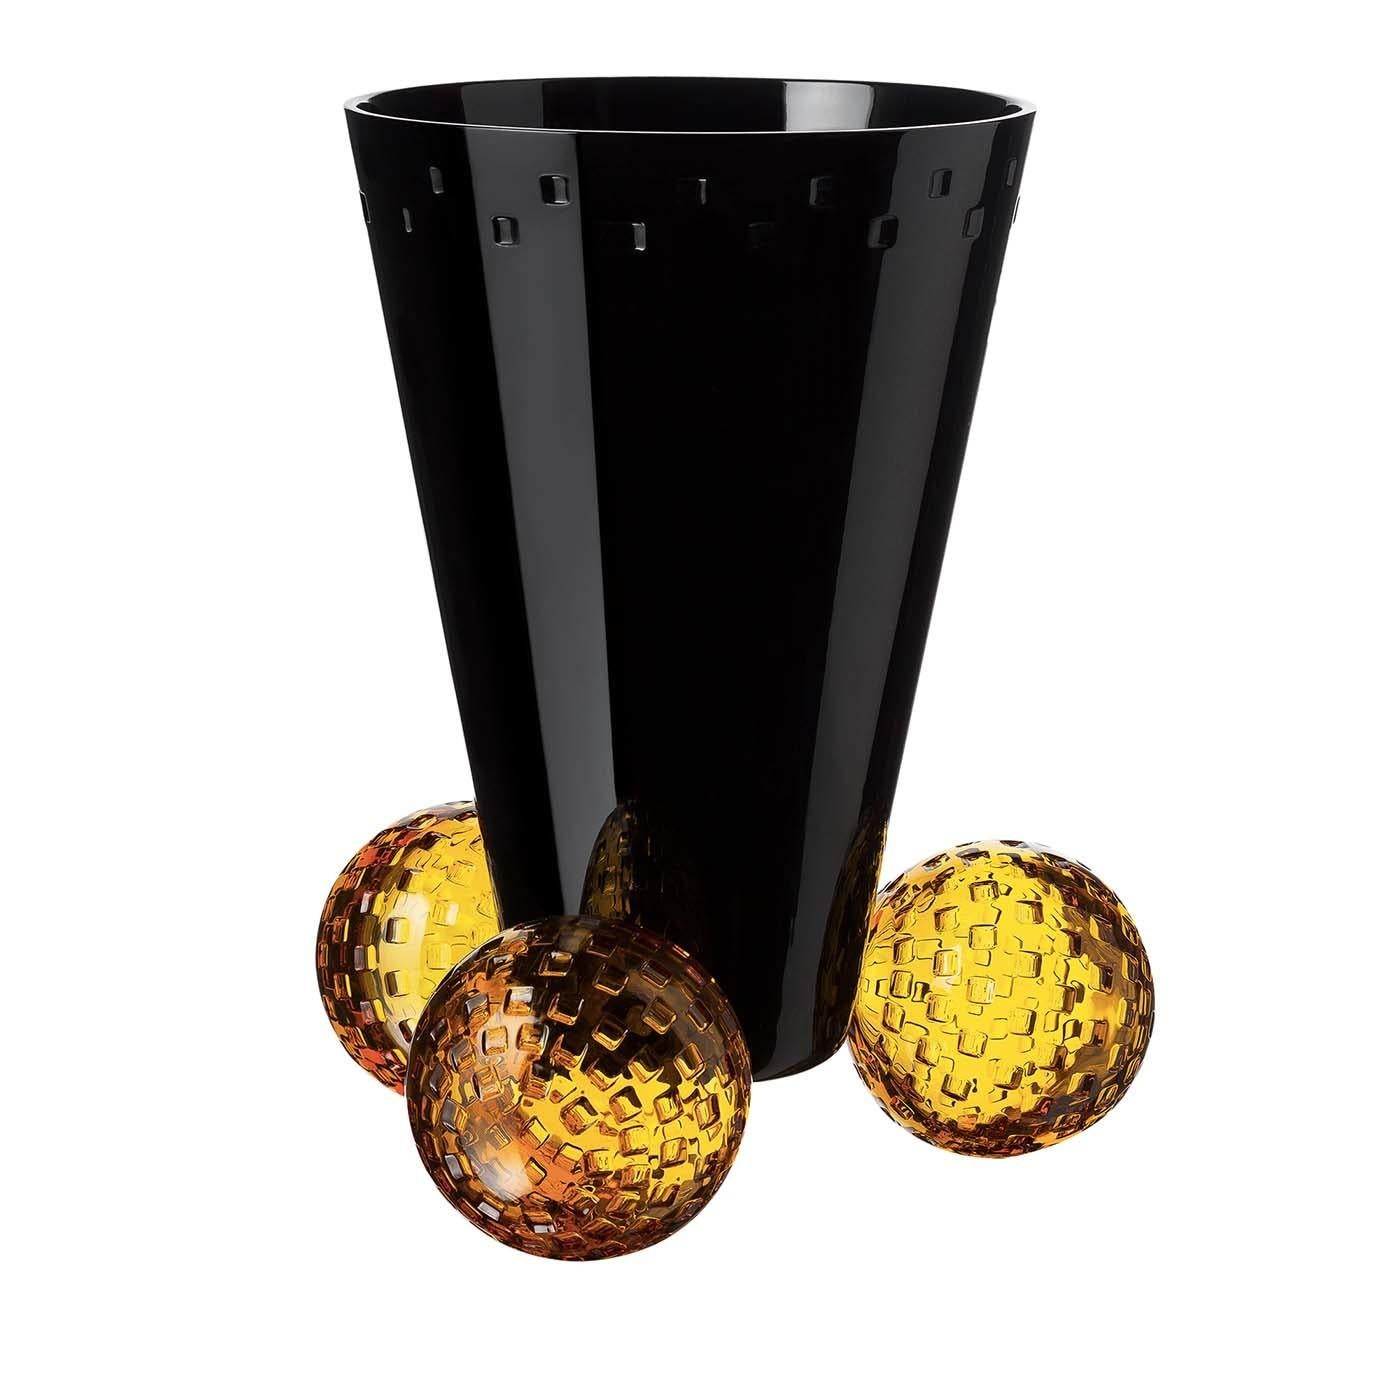 This stunning crystal vase is part of the Acrobat collection. Its conical body in striking black is supported by a base made up of three amber-colored balls. The contrast between the two colors is enriched by a striking texture that covers the